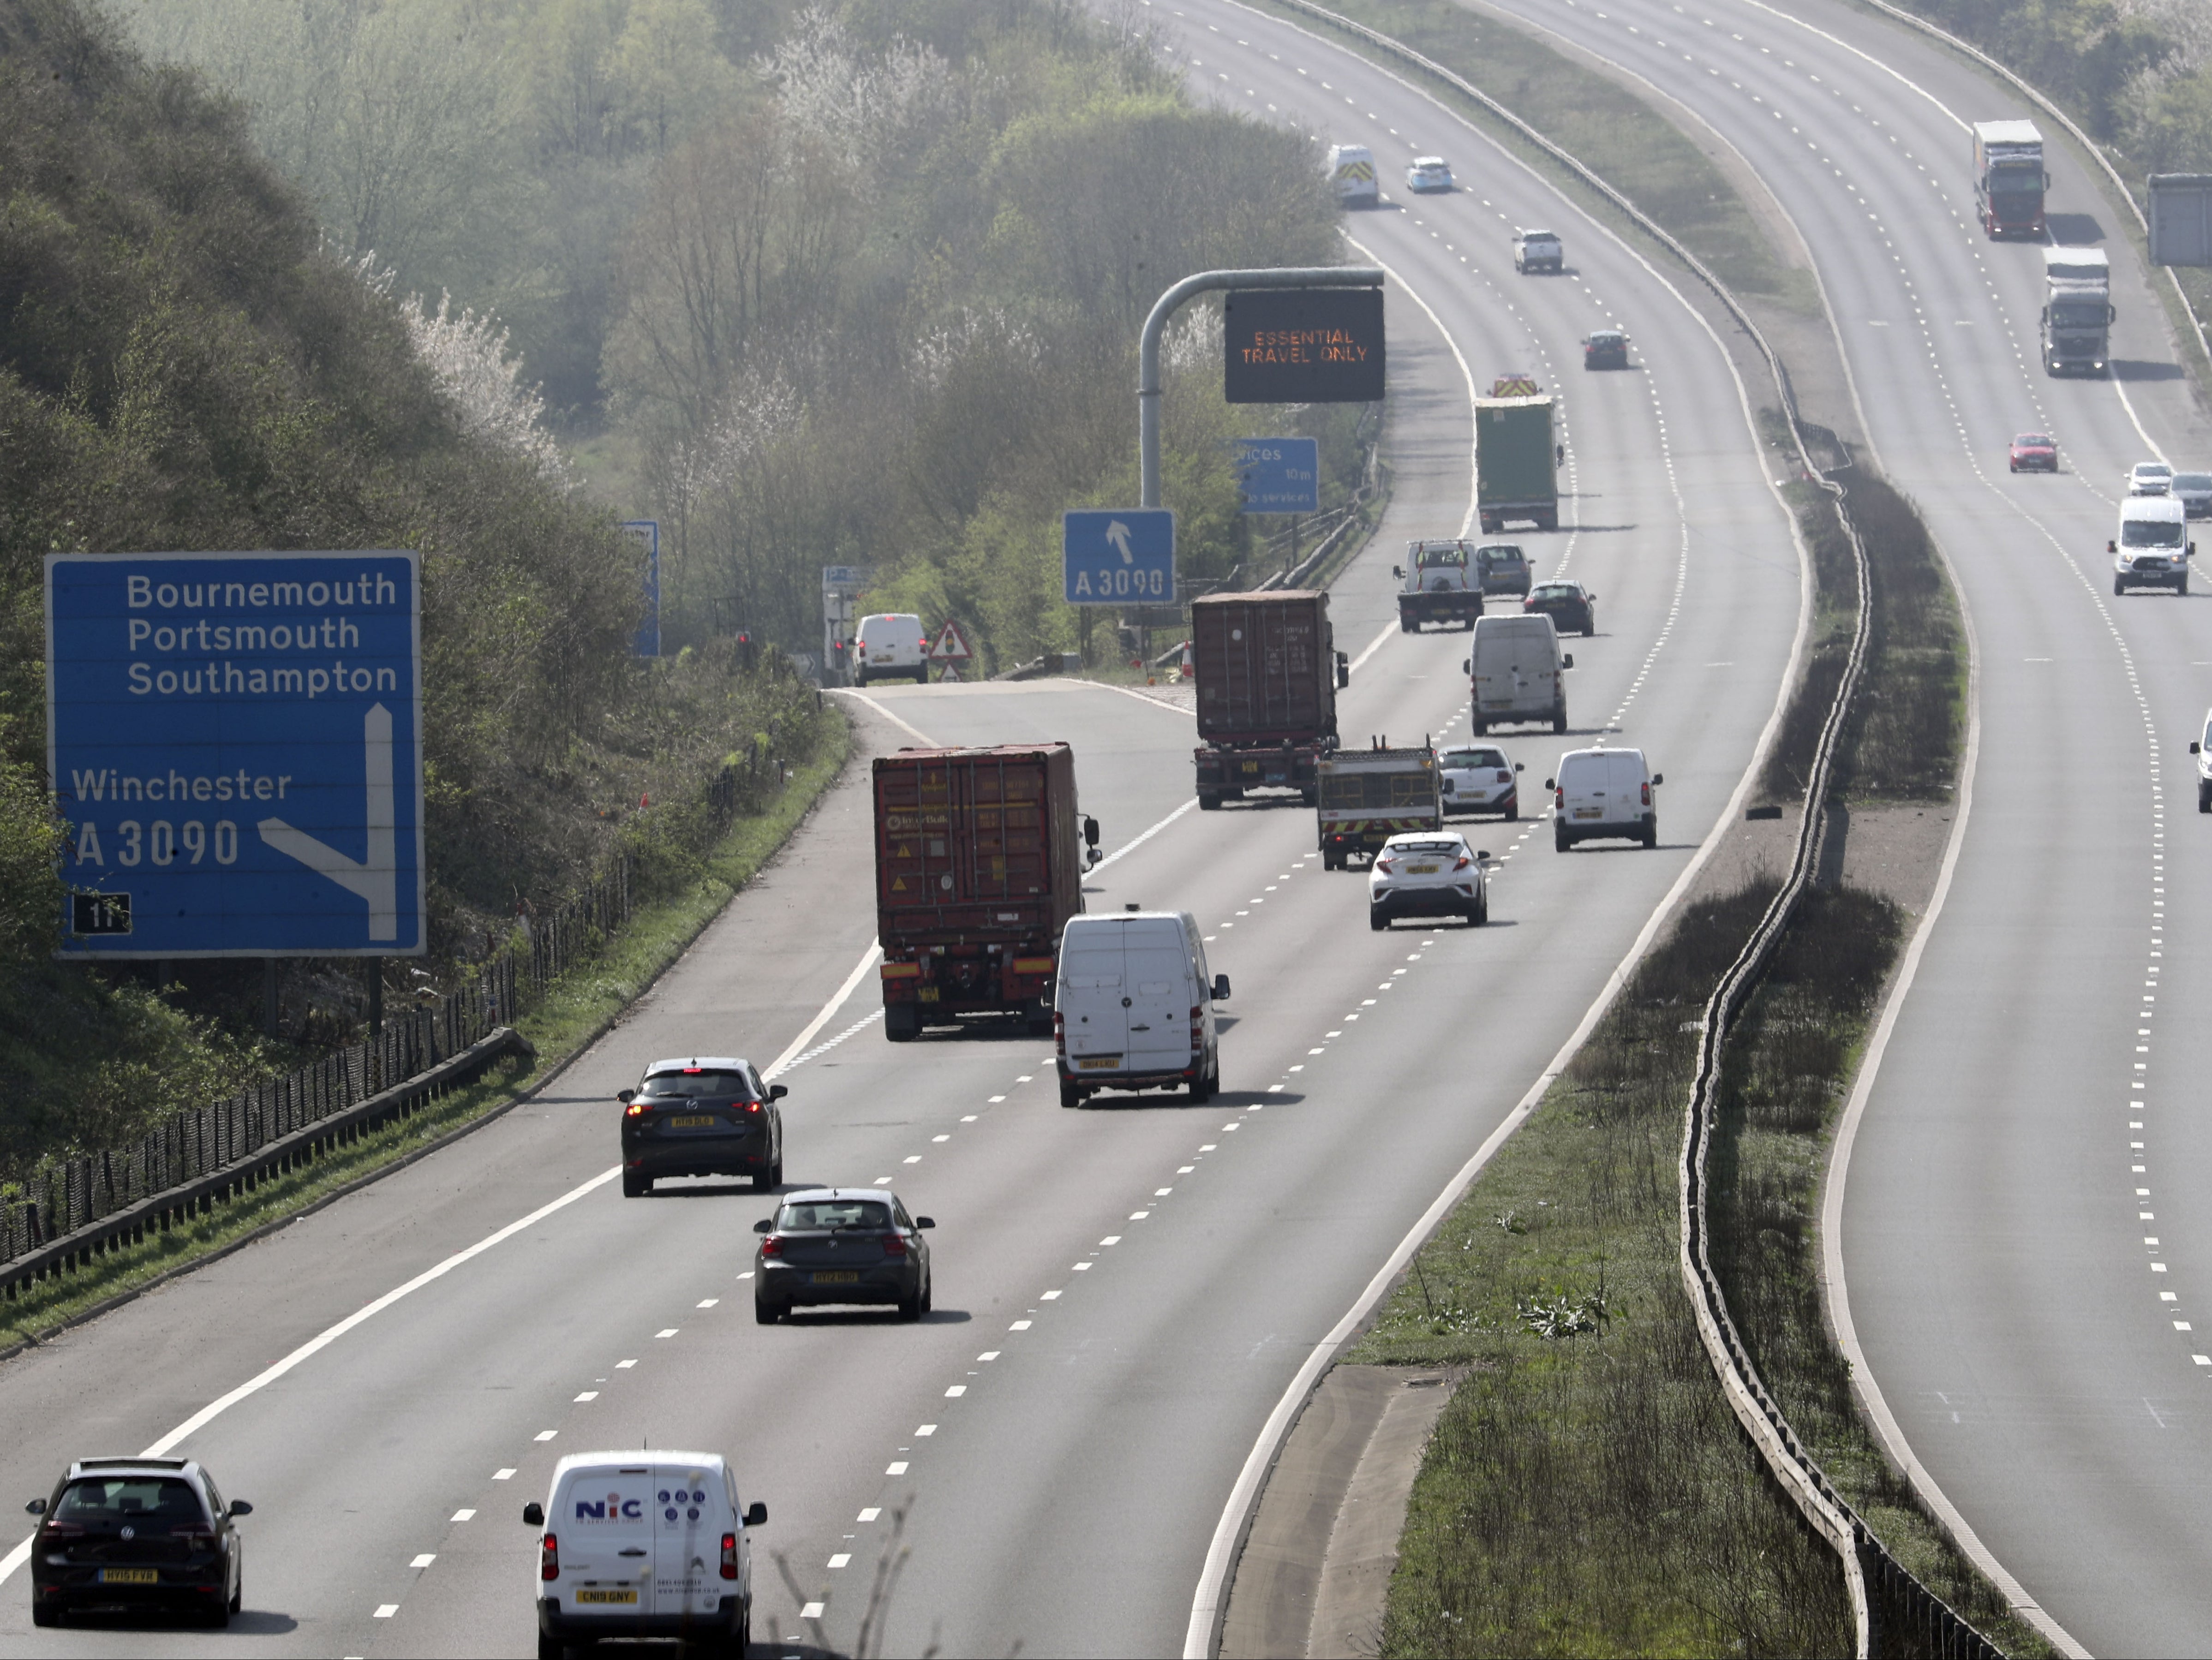 The incident occurred on the slip road at Junction 11 on the southbound M3